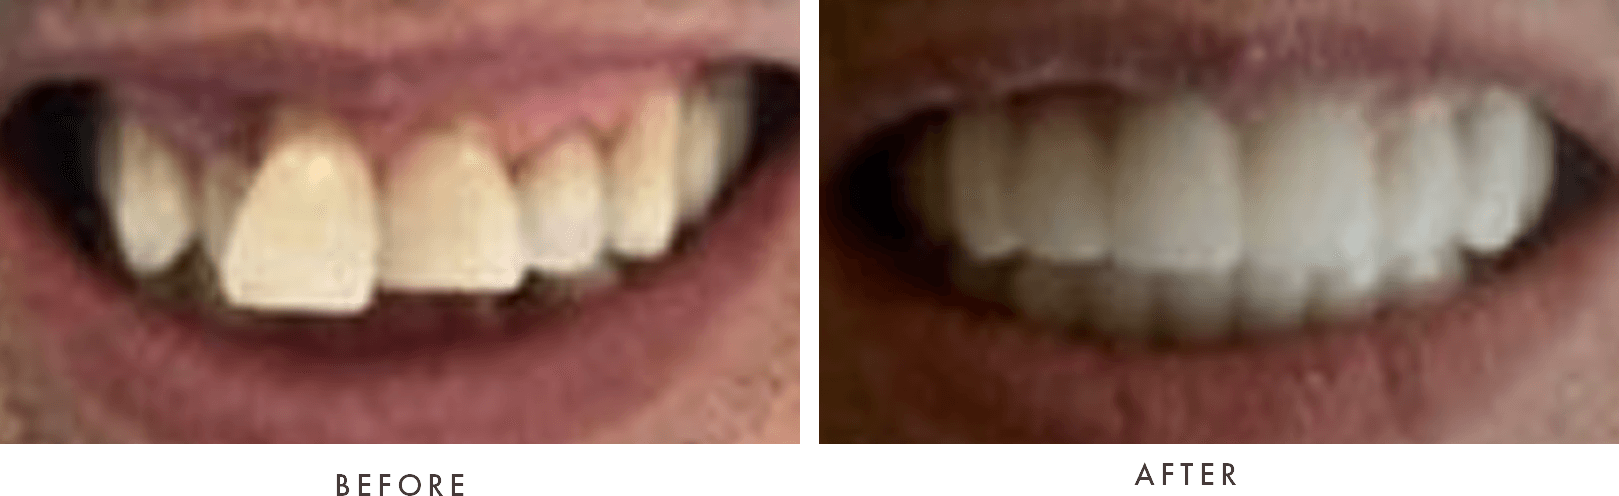 case 18 combined before and after old website